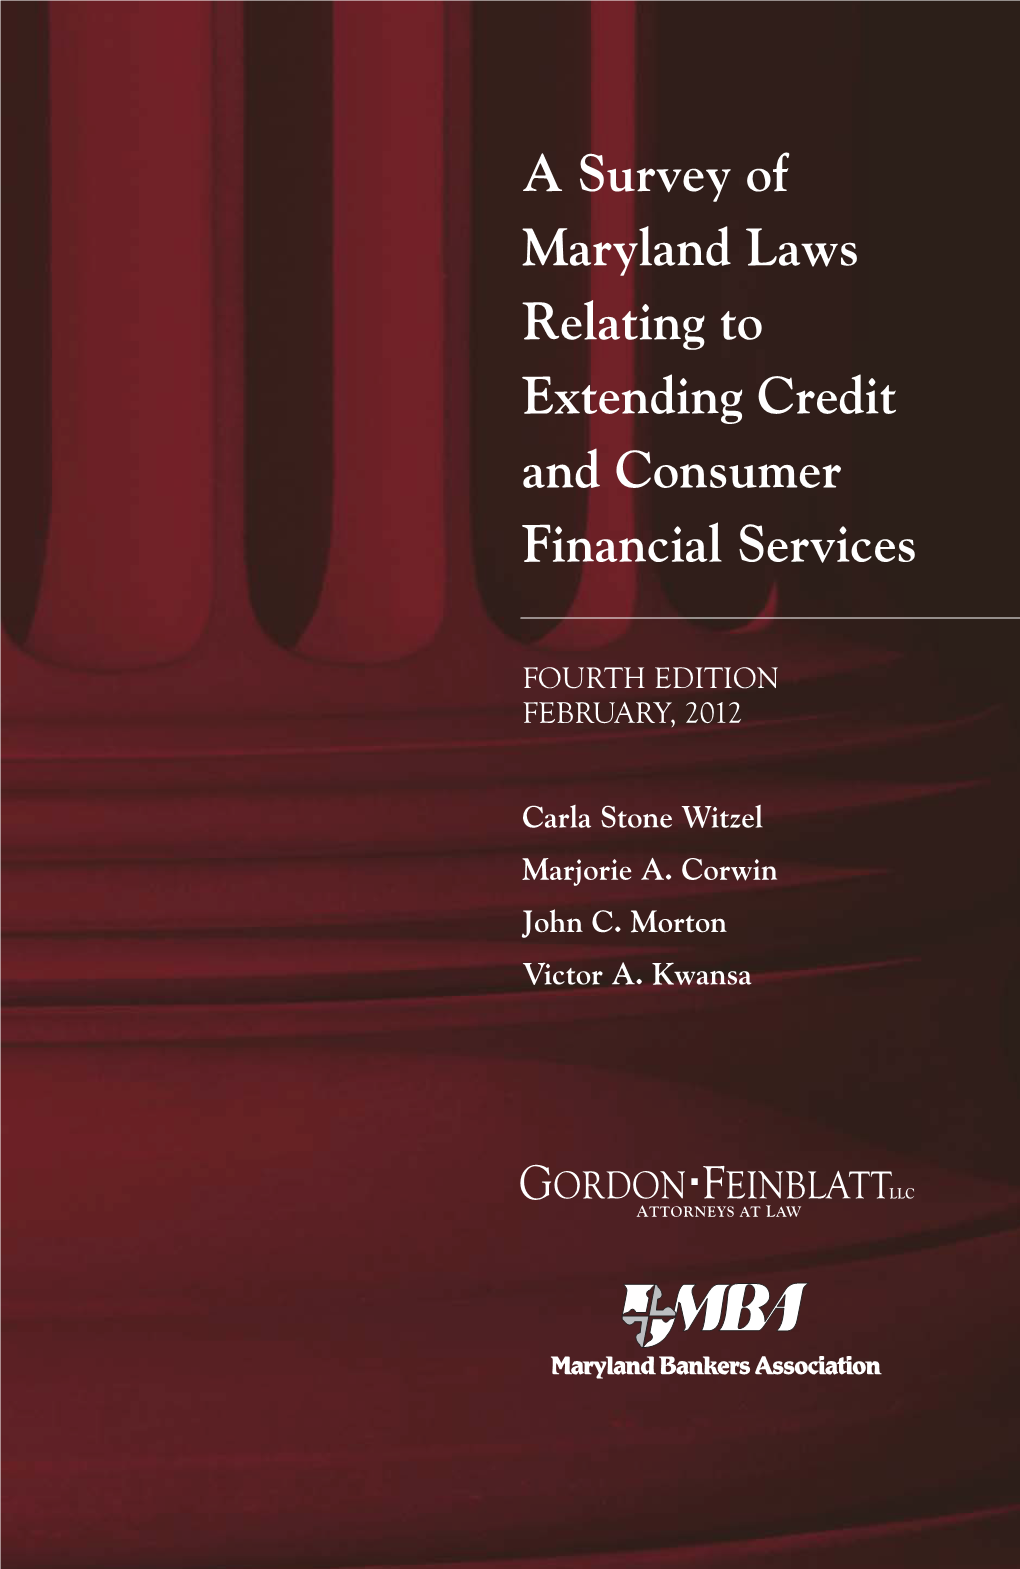 A Survey of Maryland Laws Relating to Extending Credit and Consumer Financial Services